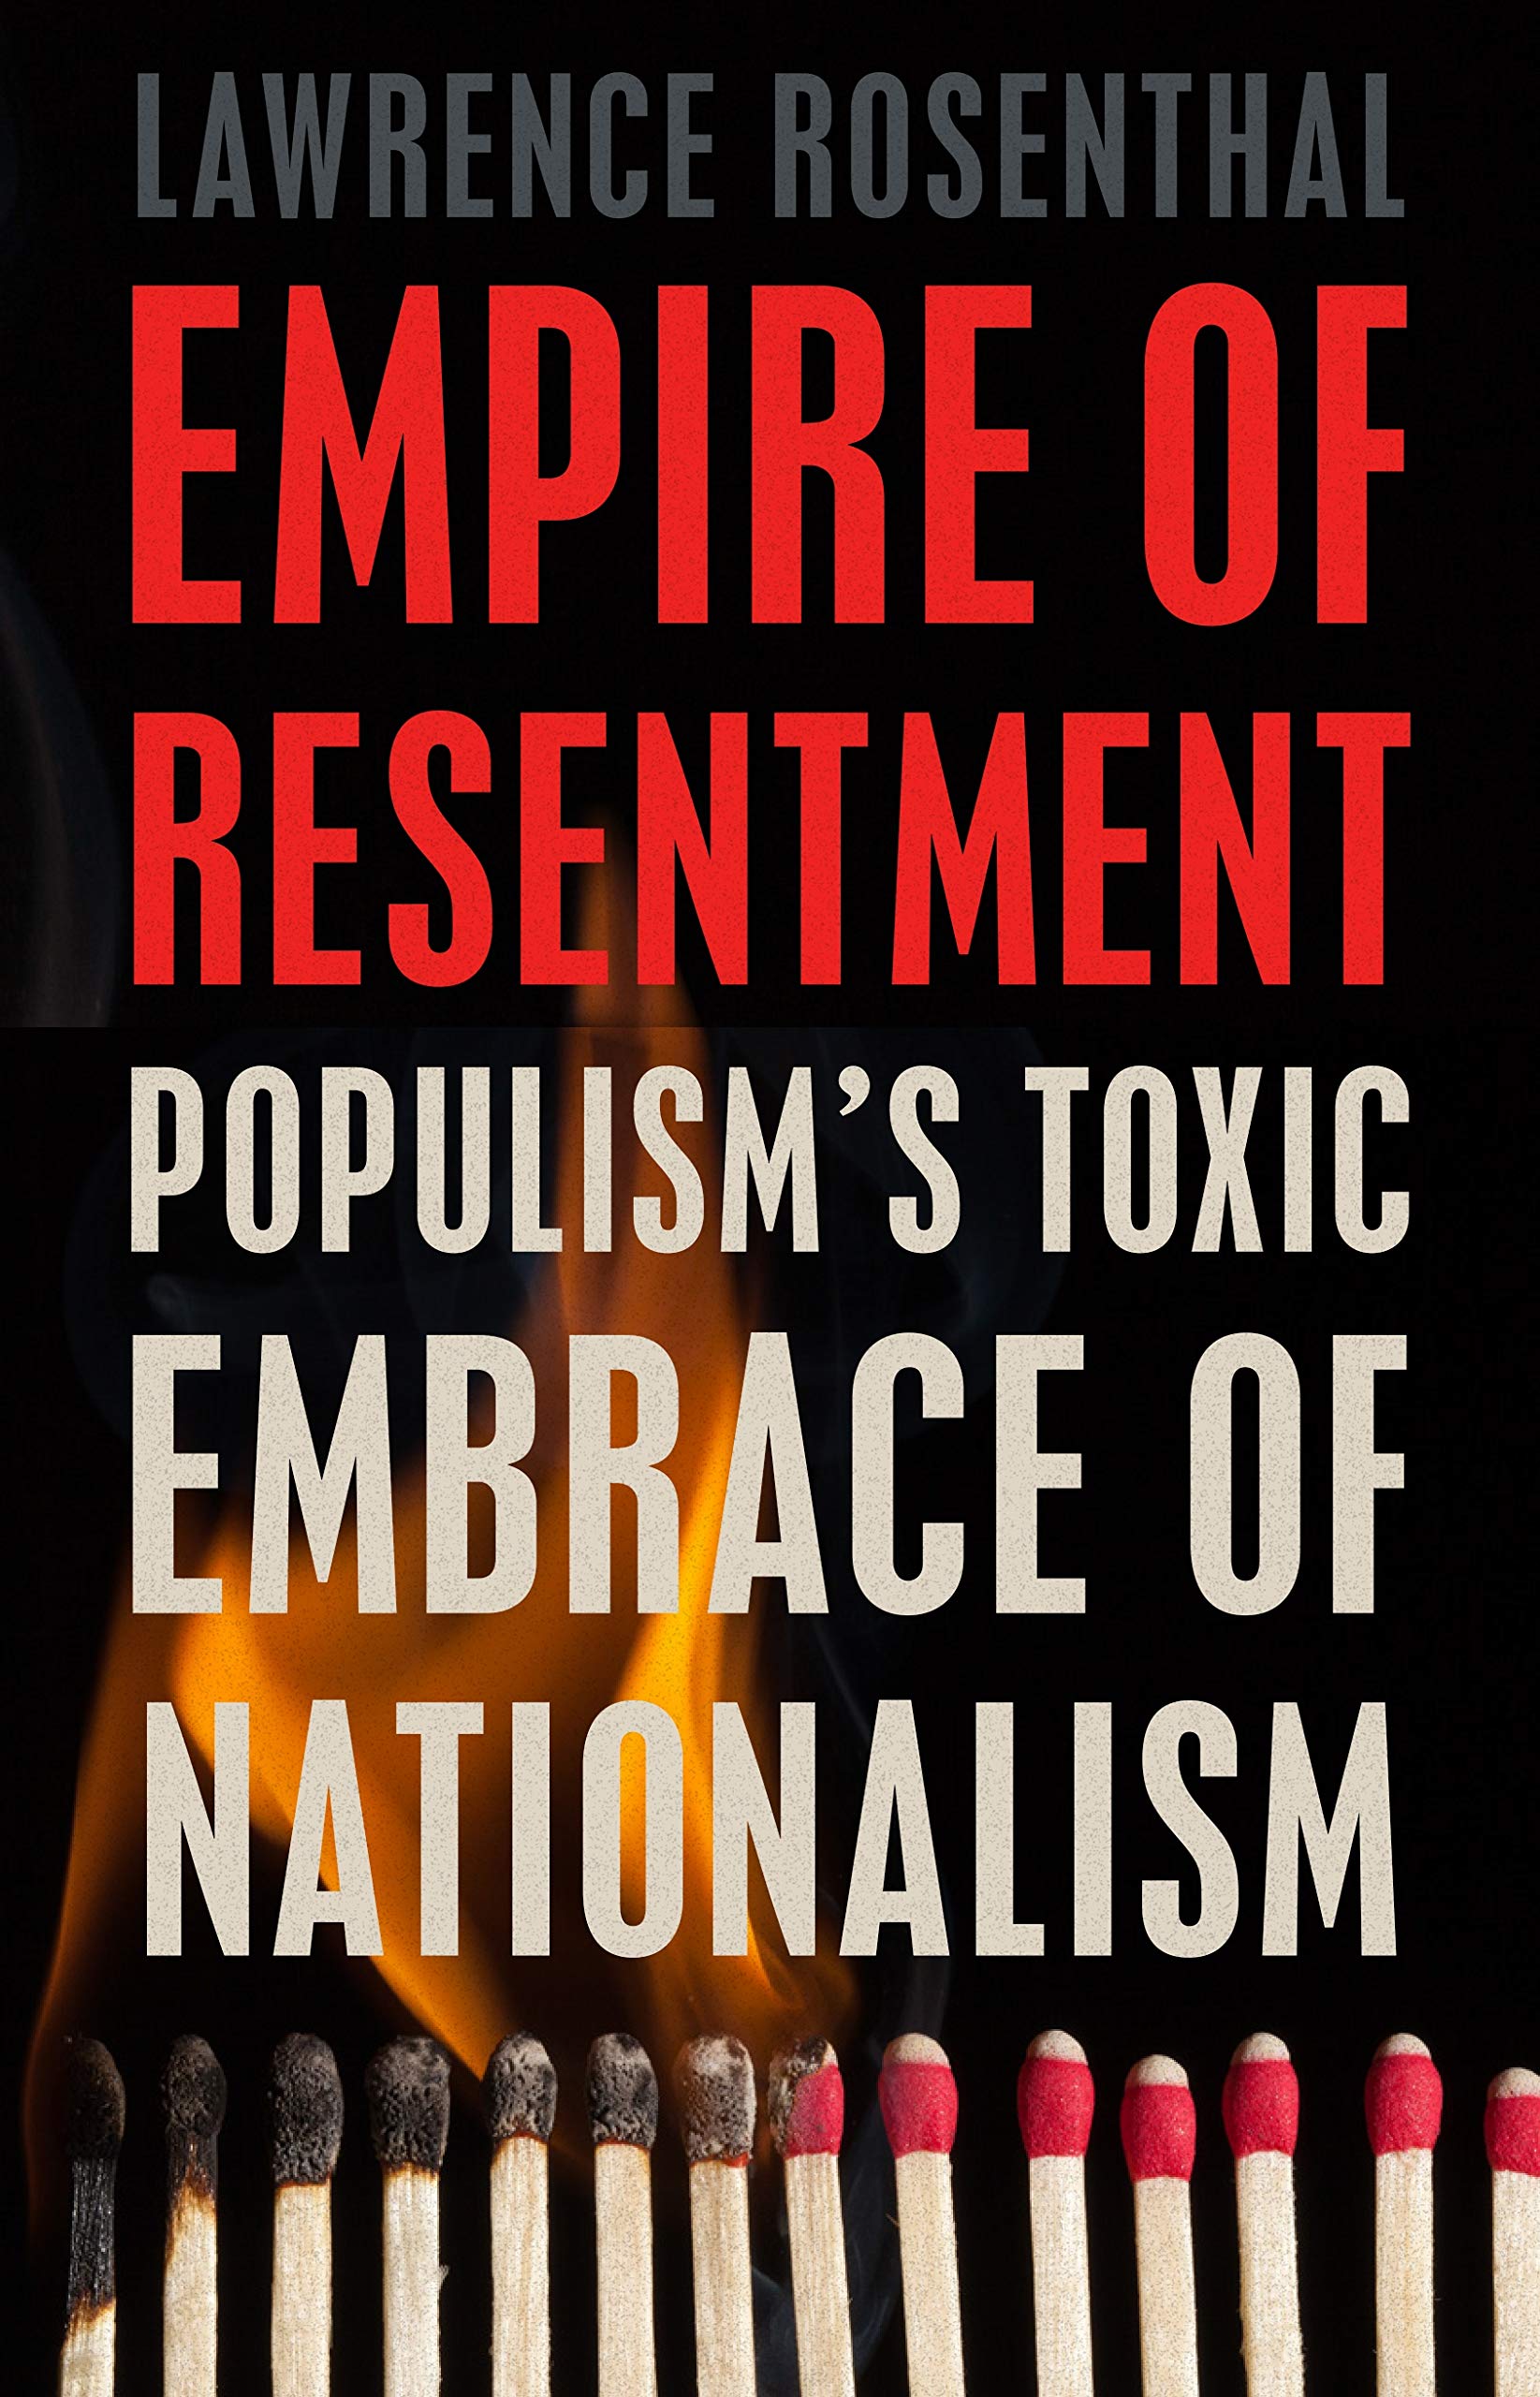 Empire of Resentment: Populism’s Toxic Embrace of Nationalism